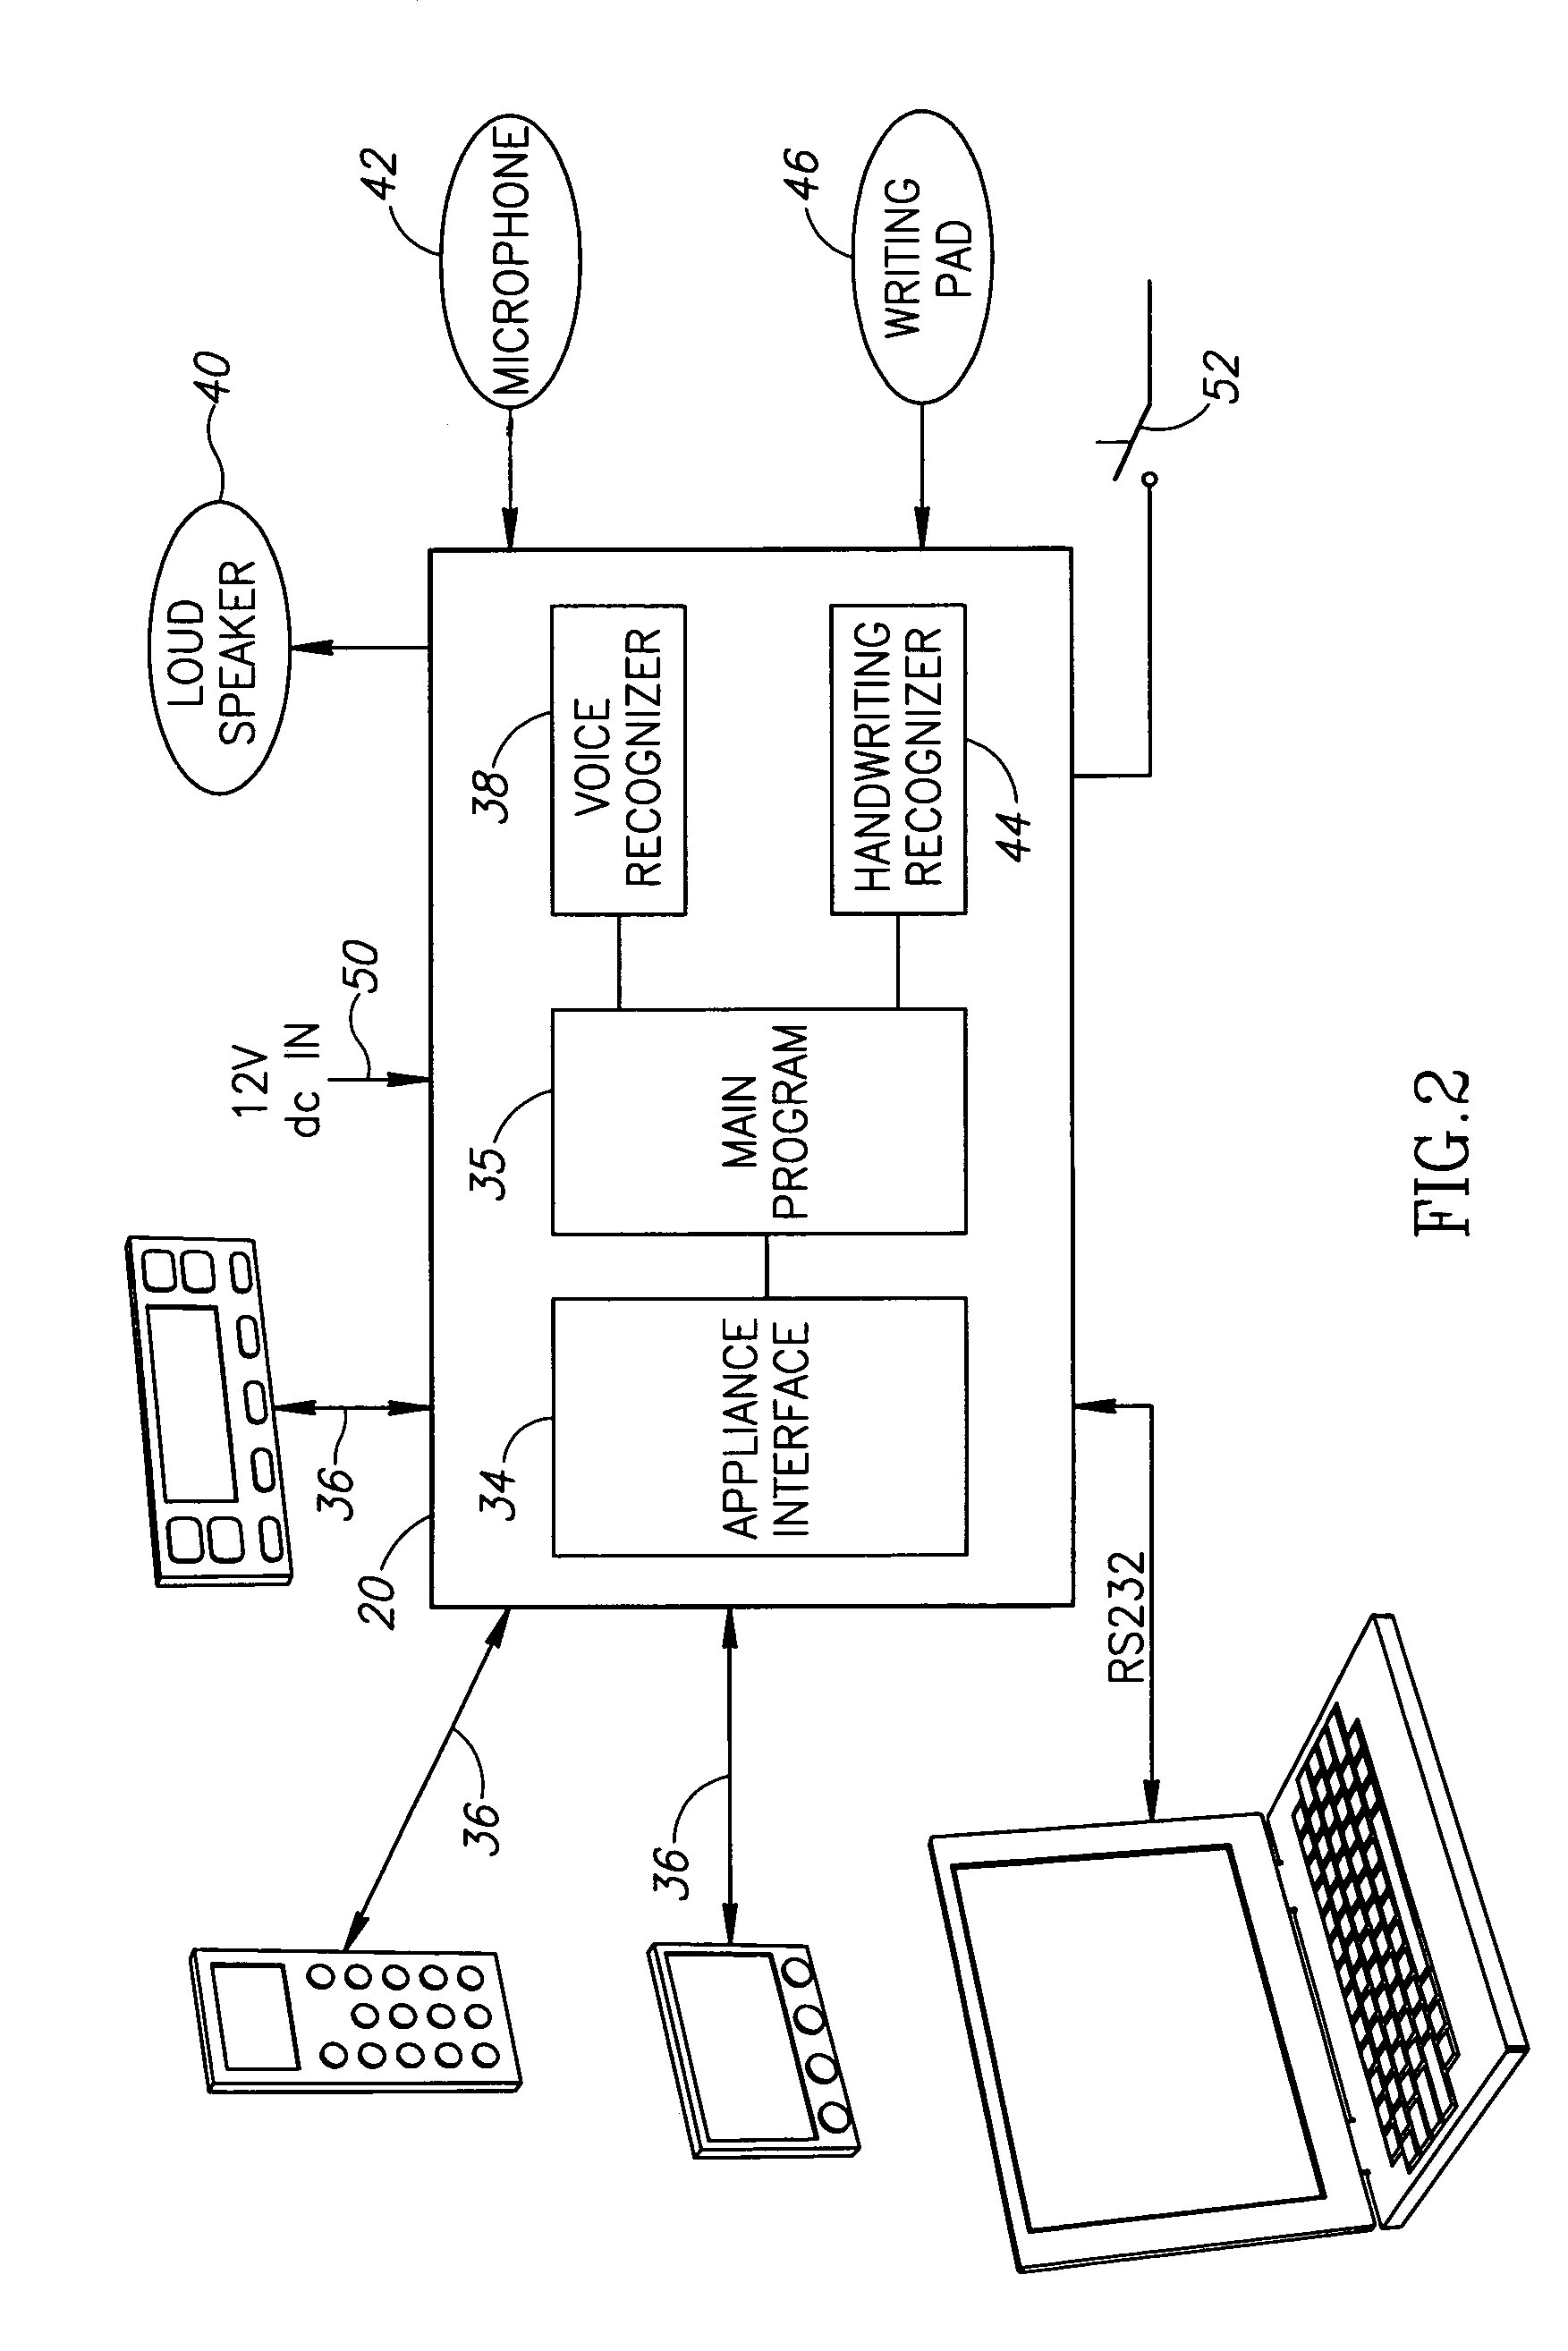 Handwritten and voice control of vehicle components